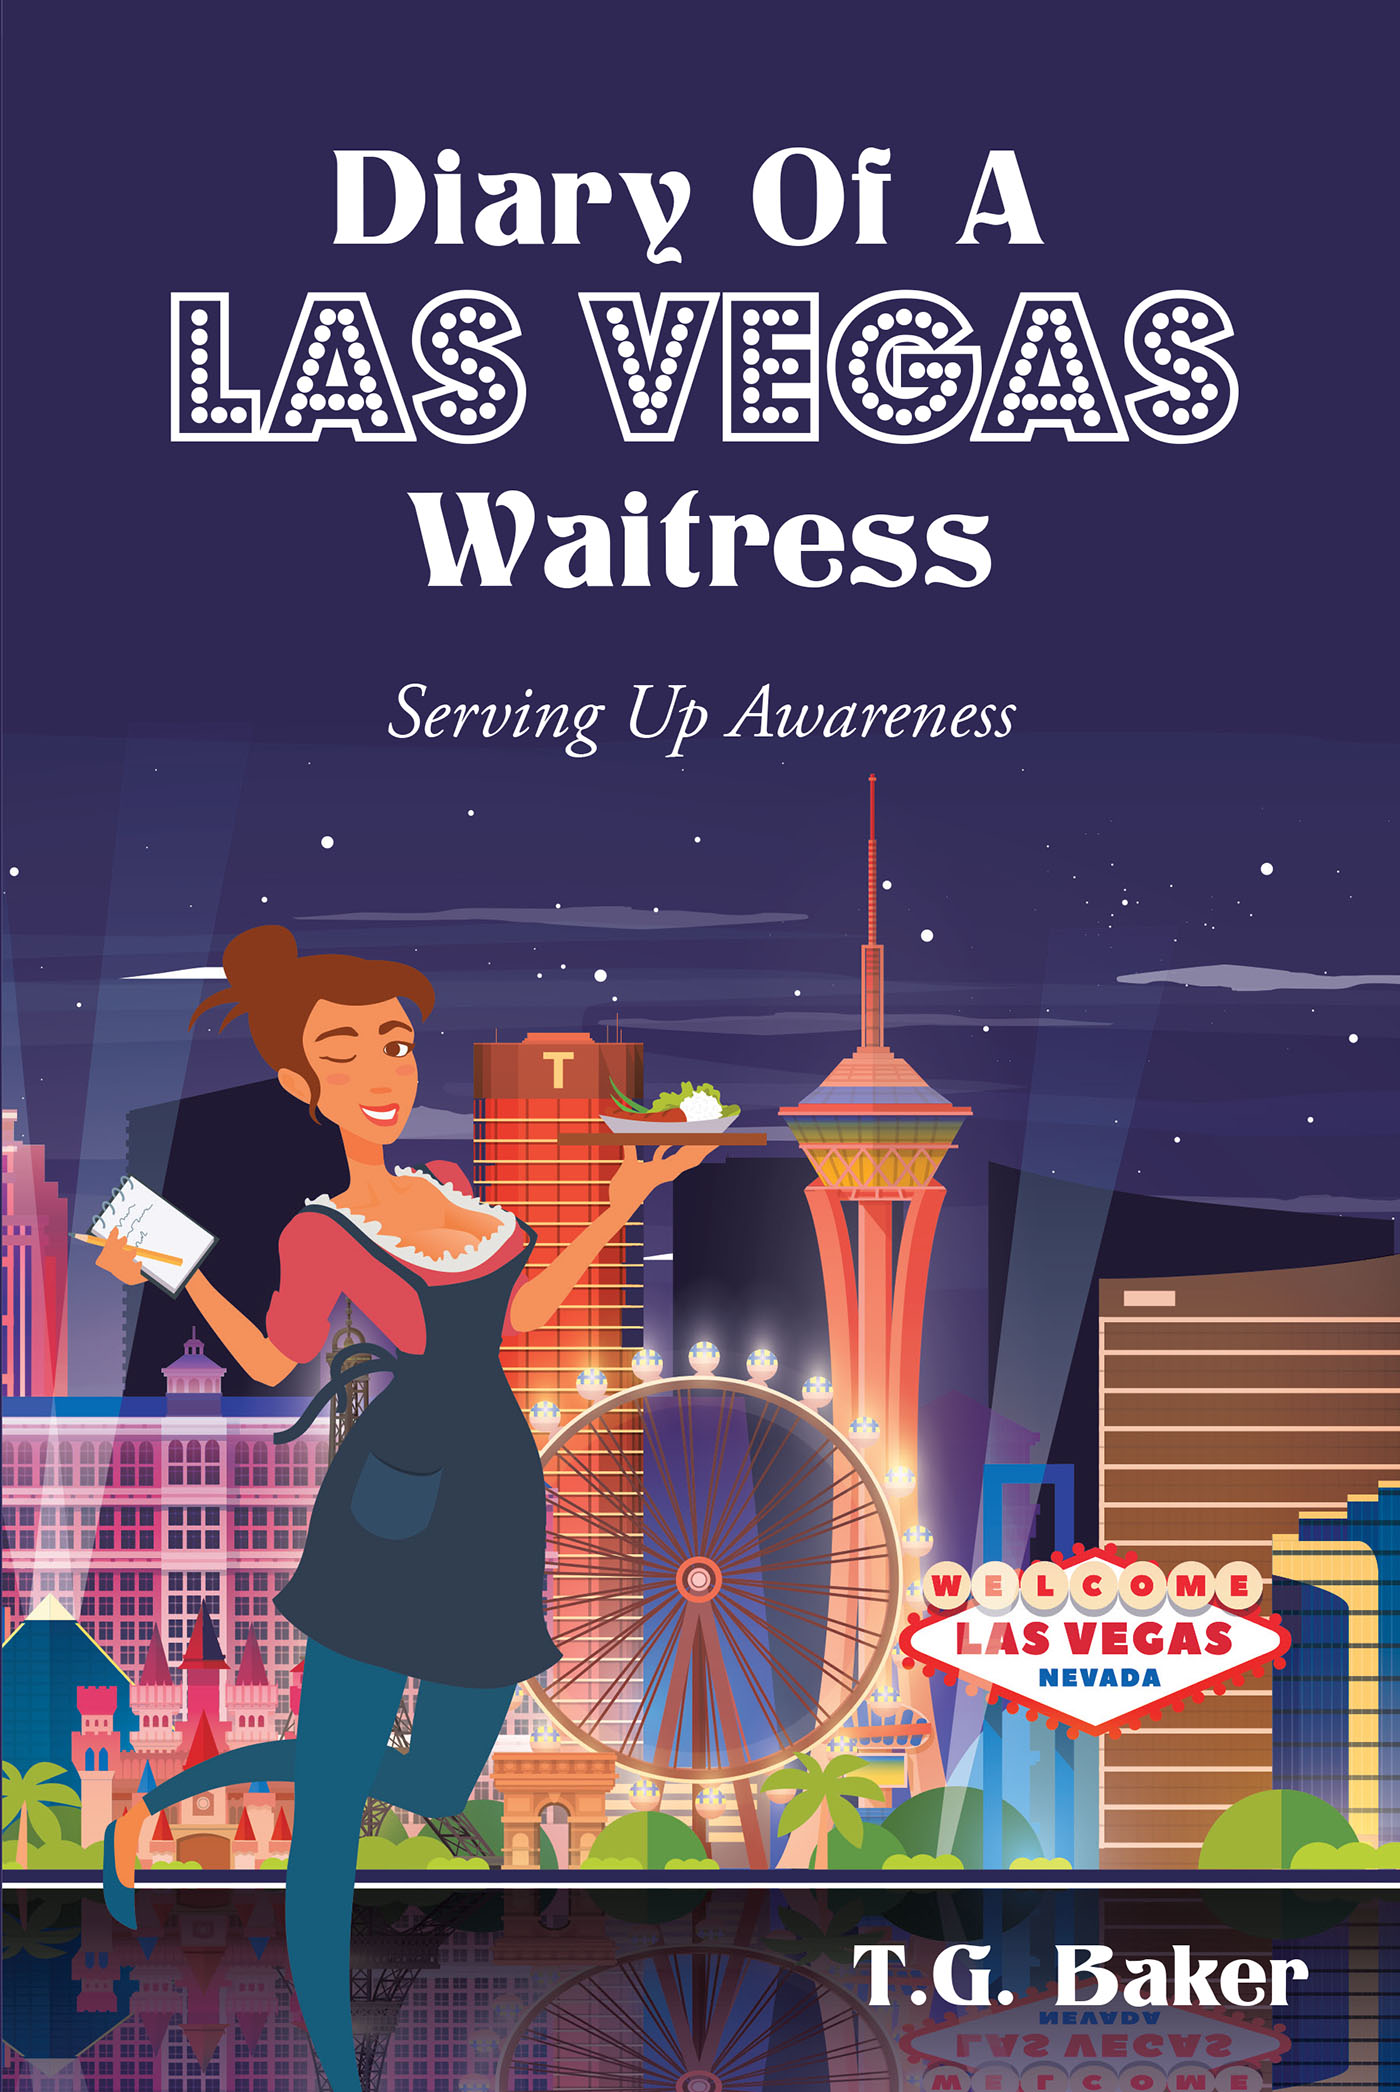 Author T.G. Baker’s New Book, "Diary of a Las Vegas Waitress," Stirs Up More Than Just Coffee